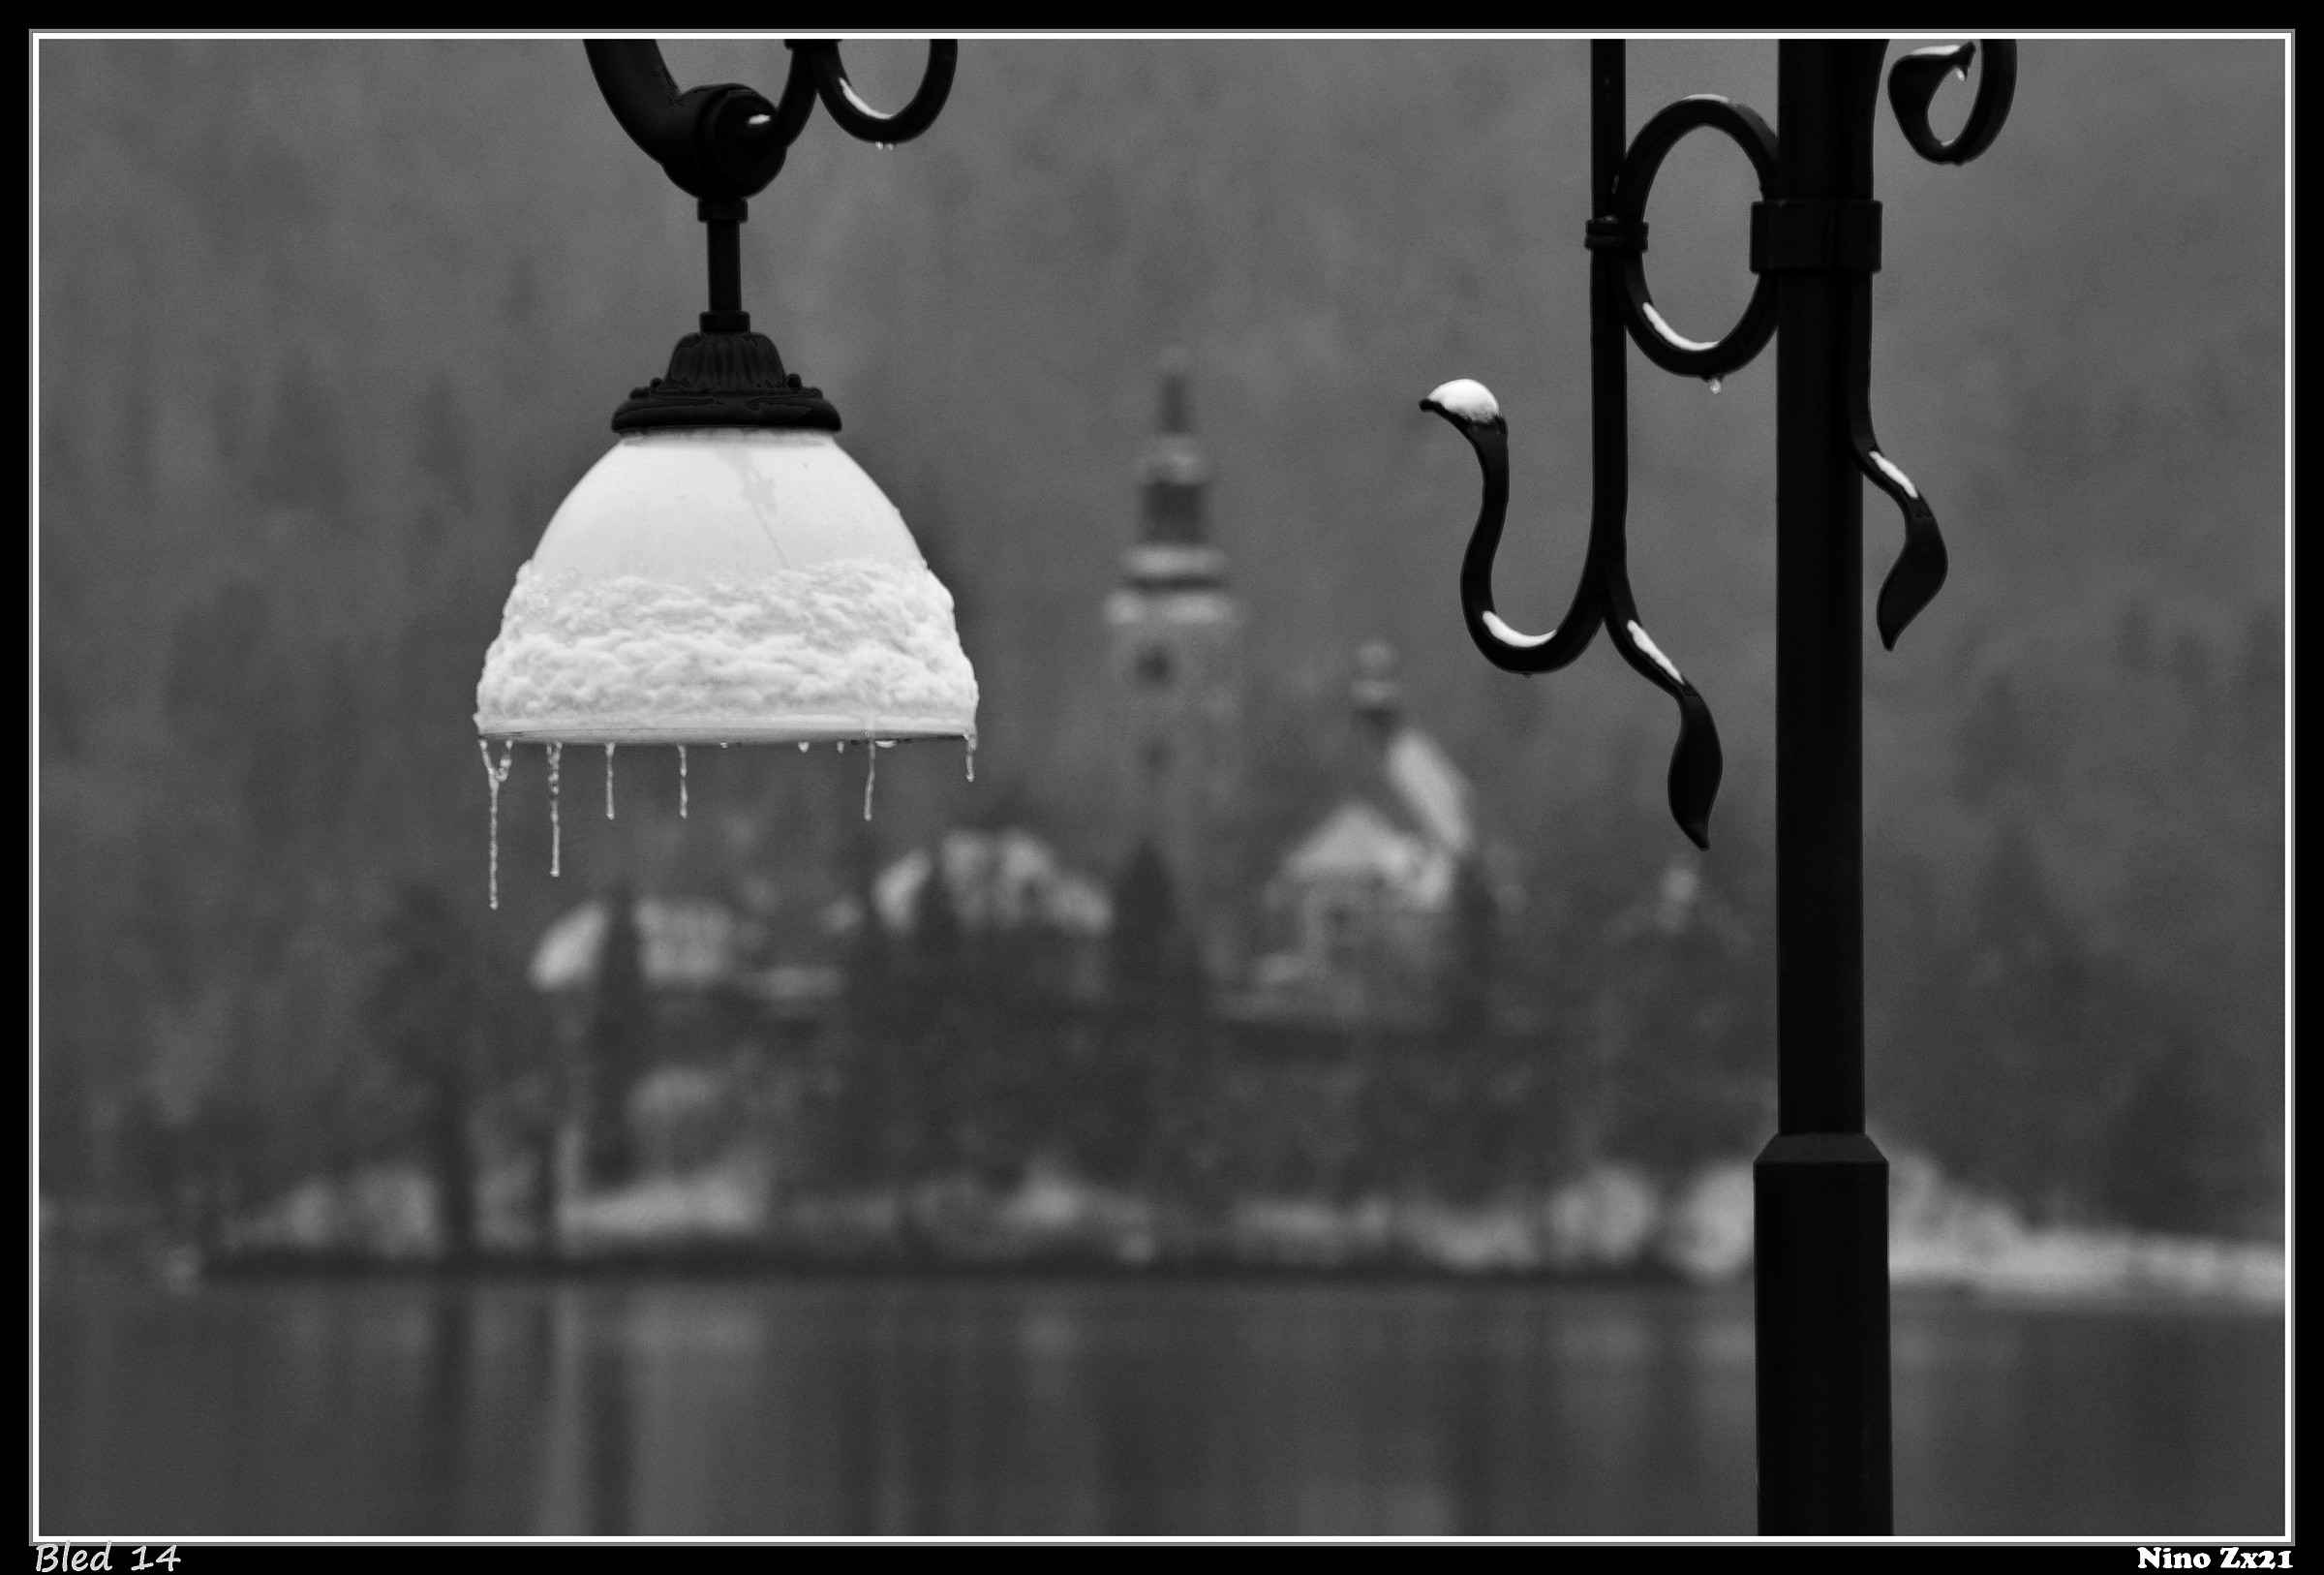 Remembering Bled...